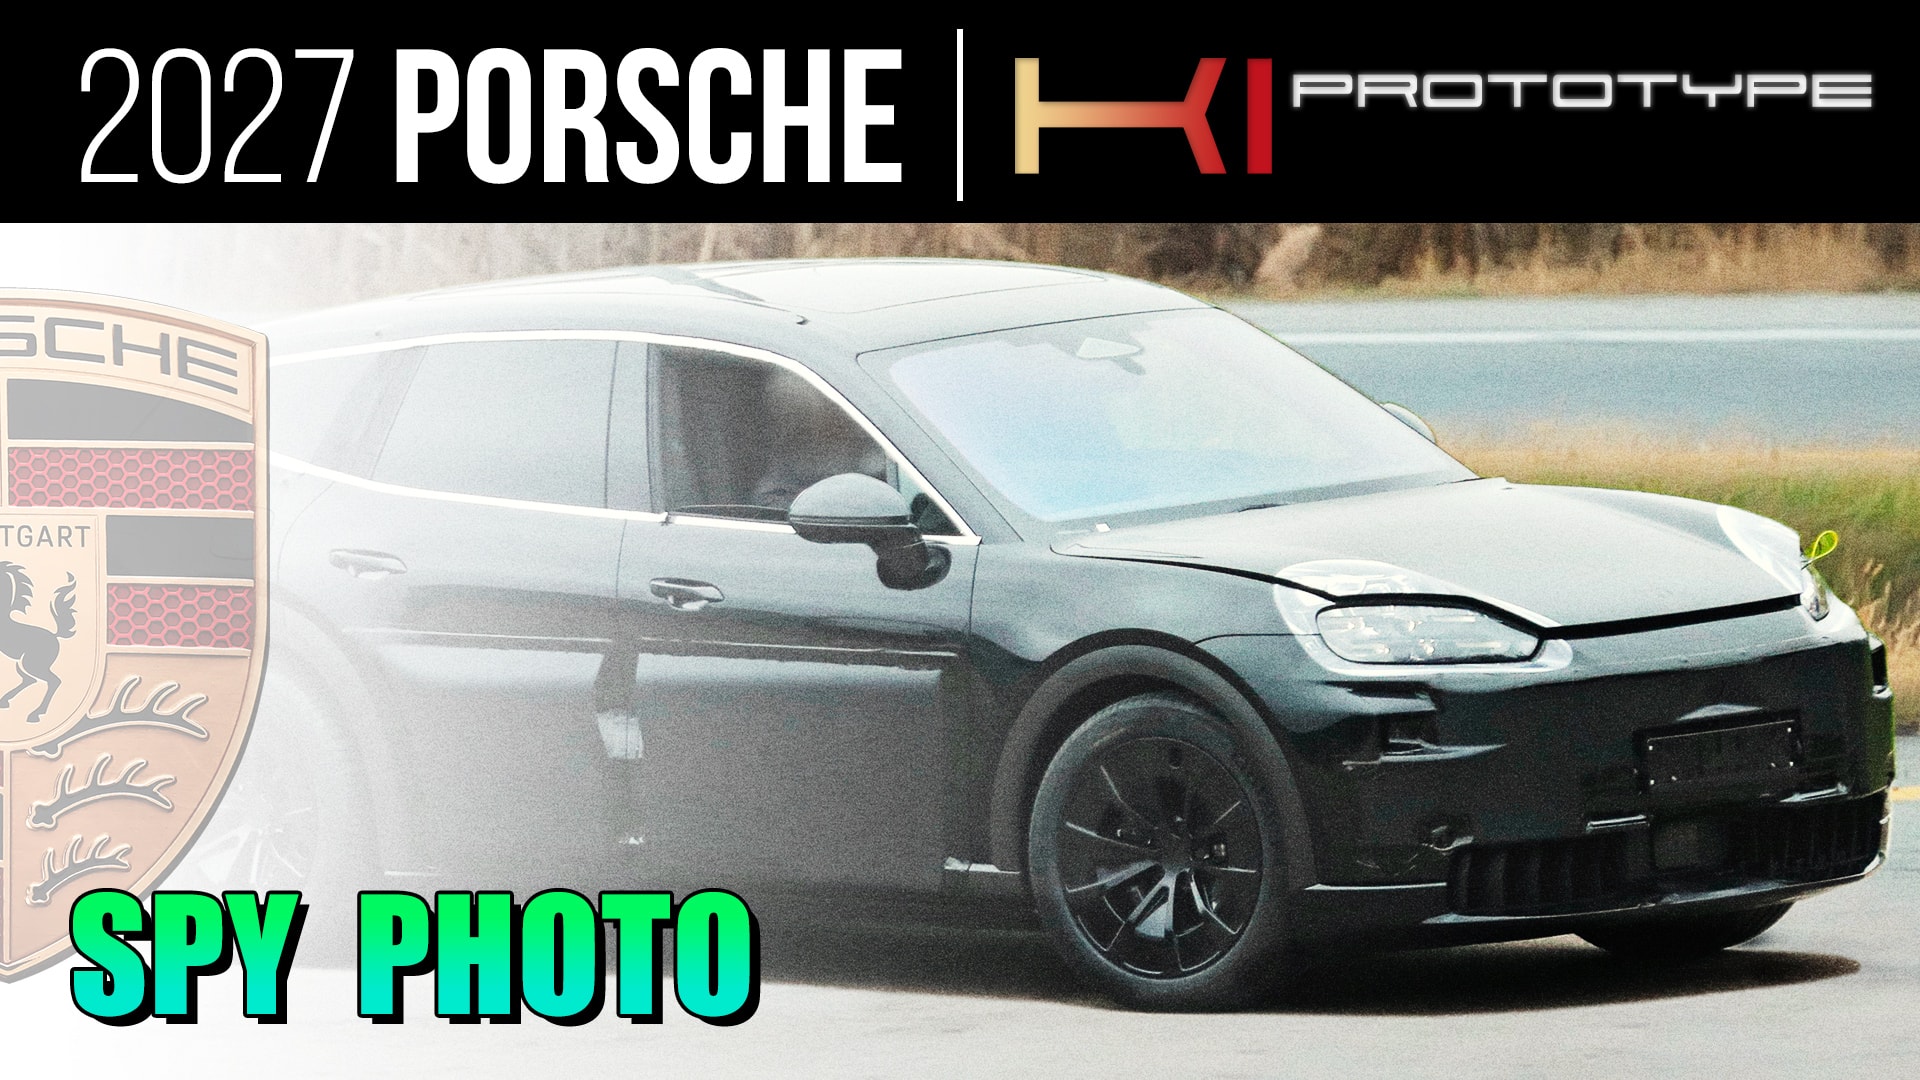 The First Porsche K1 Spy Pictures Confirm Details of the Rumored Electric Three-Row SUV